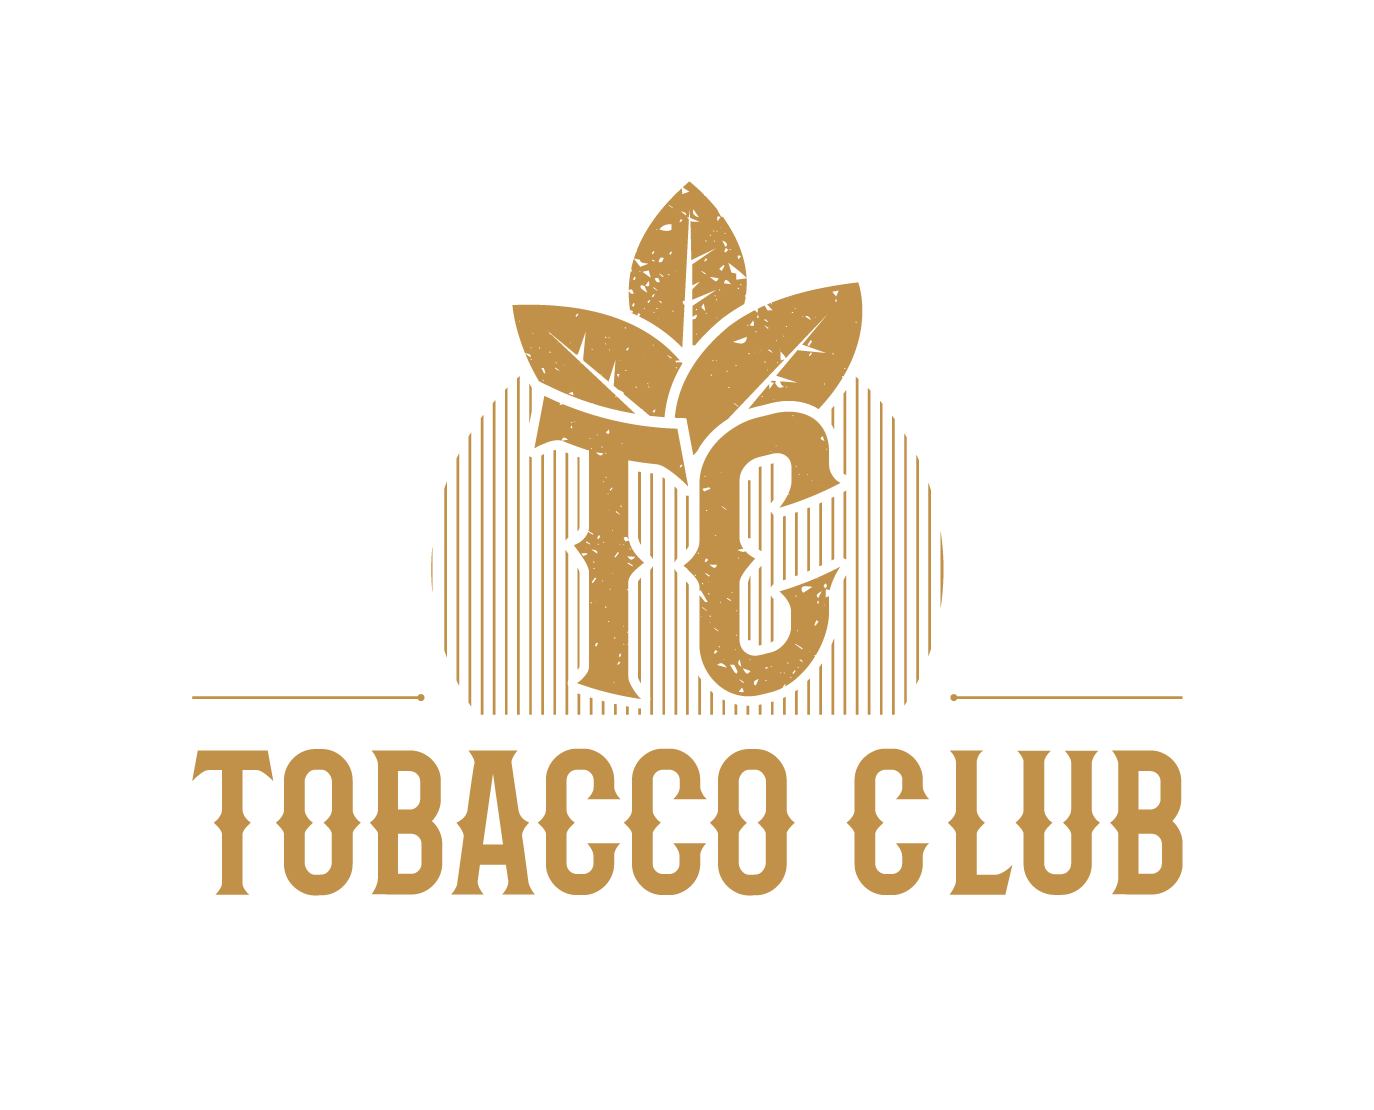 Tobacco Club Disposable Vape Kit 20mg - All New Flavors